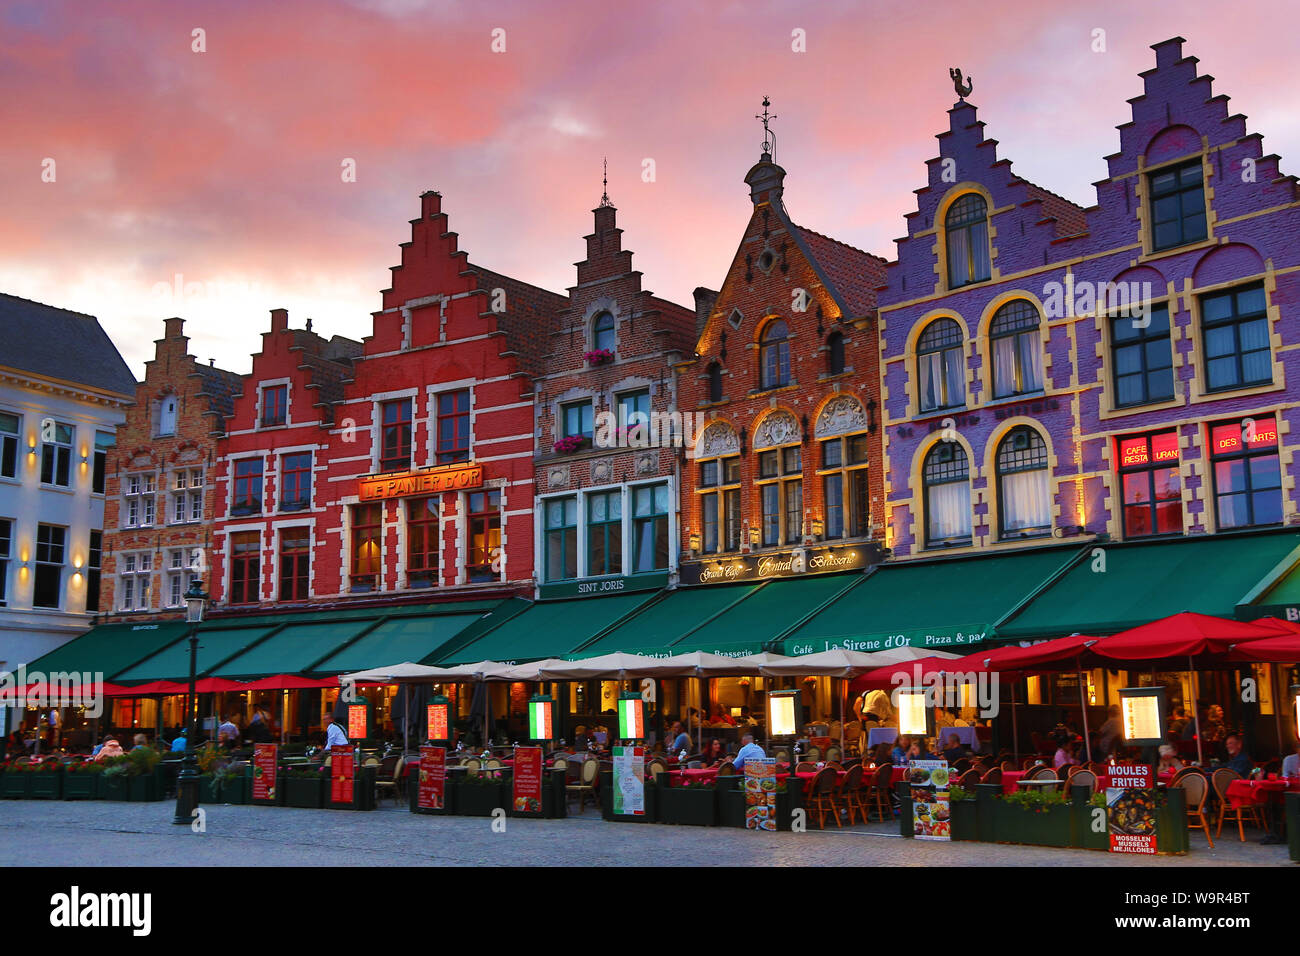 Guild houses converted into restaurants at sunset in the Market Square or Markt, Bruges, Belgium Stock Photo